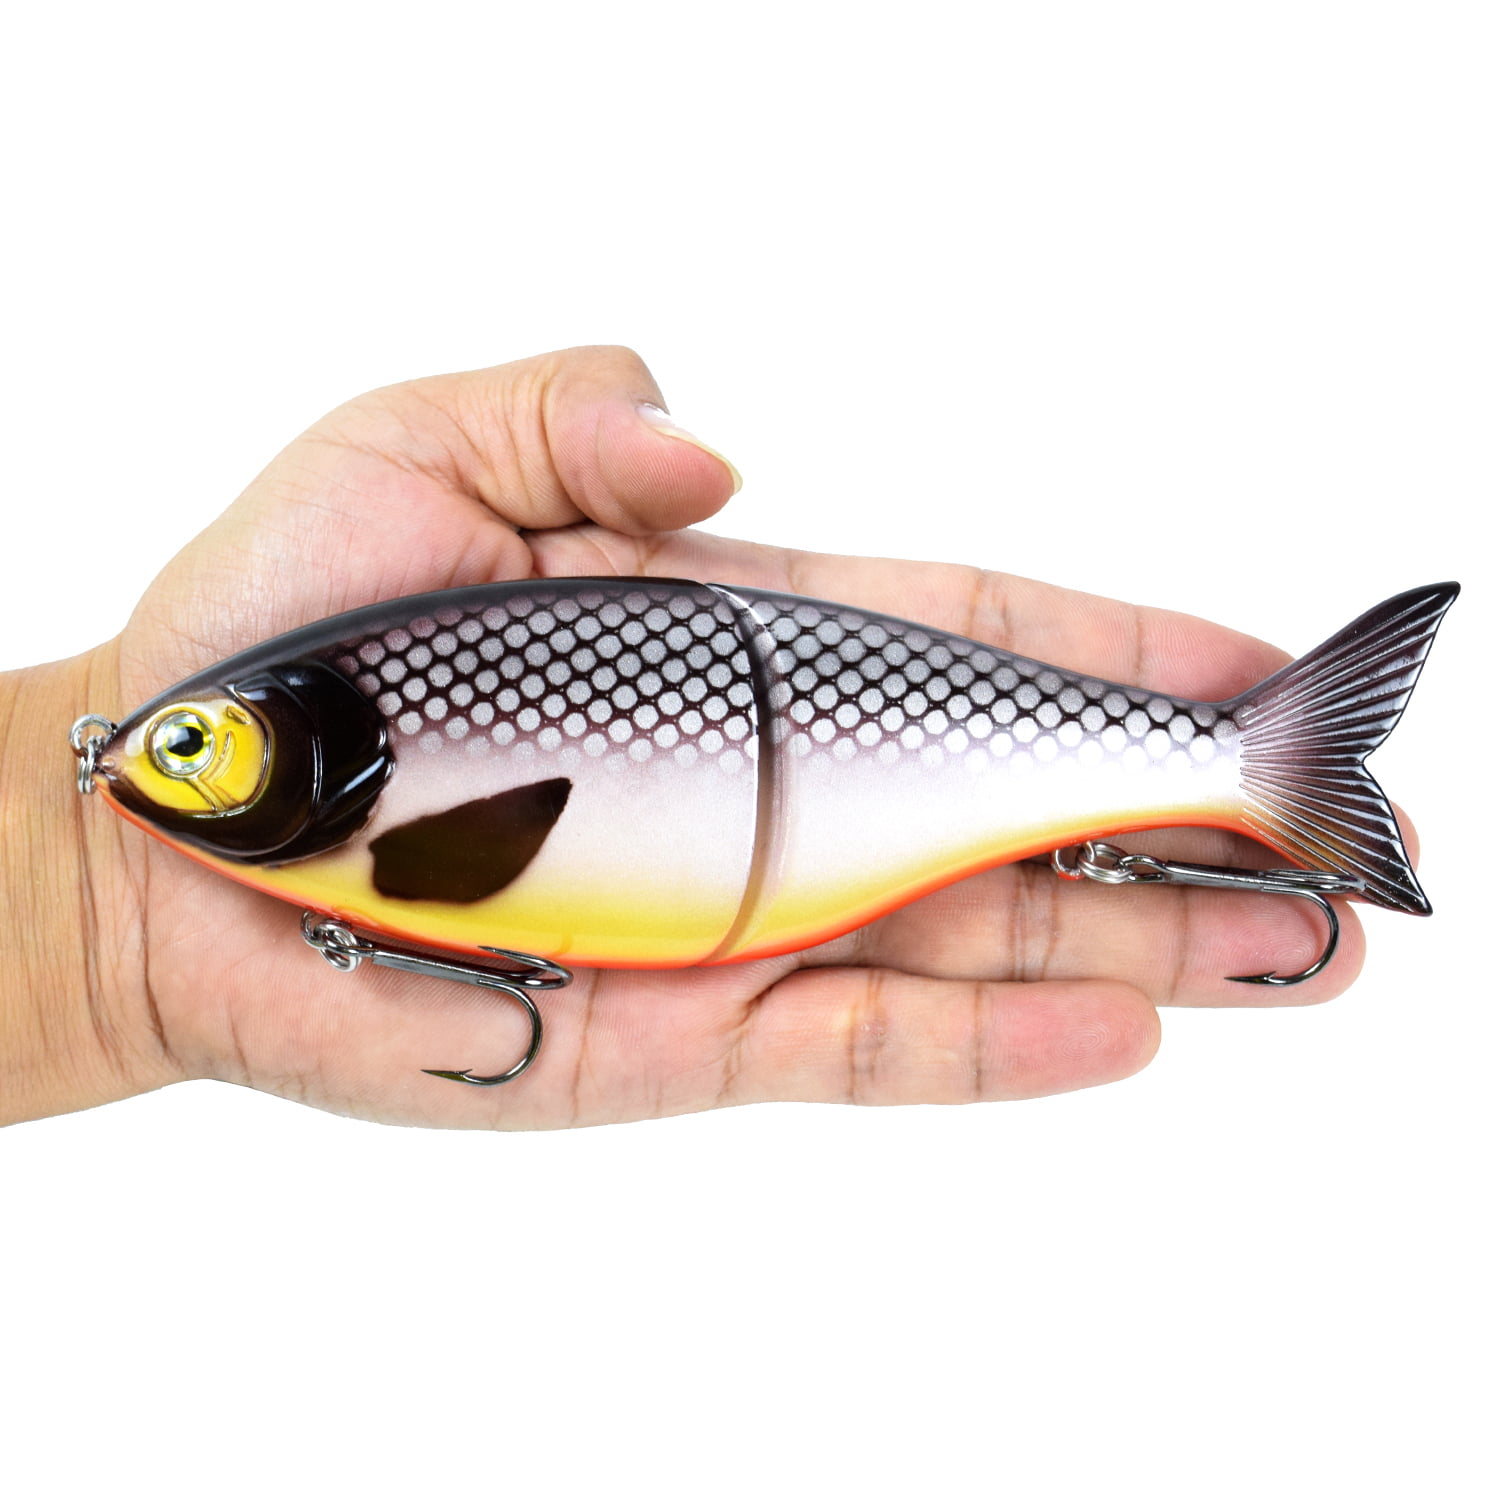 7" 3oz Jointed Fishing Lure Slow Sinking Artificial Bait with Treble Hooks 